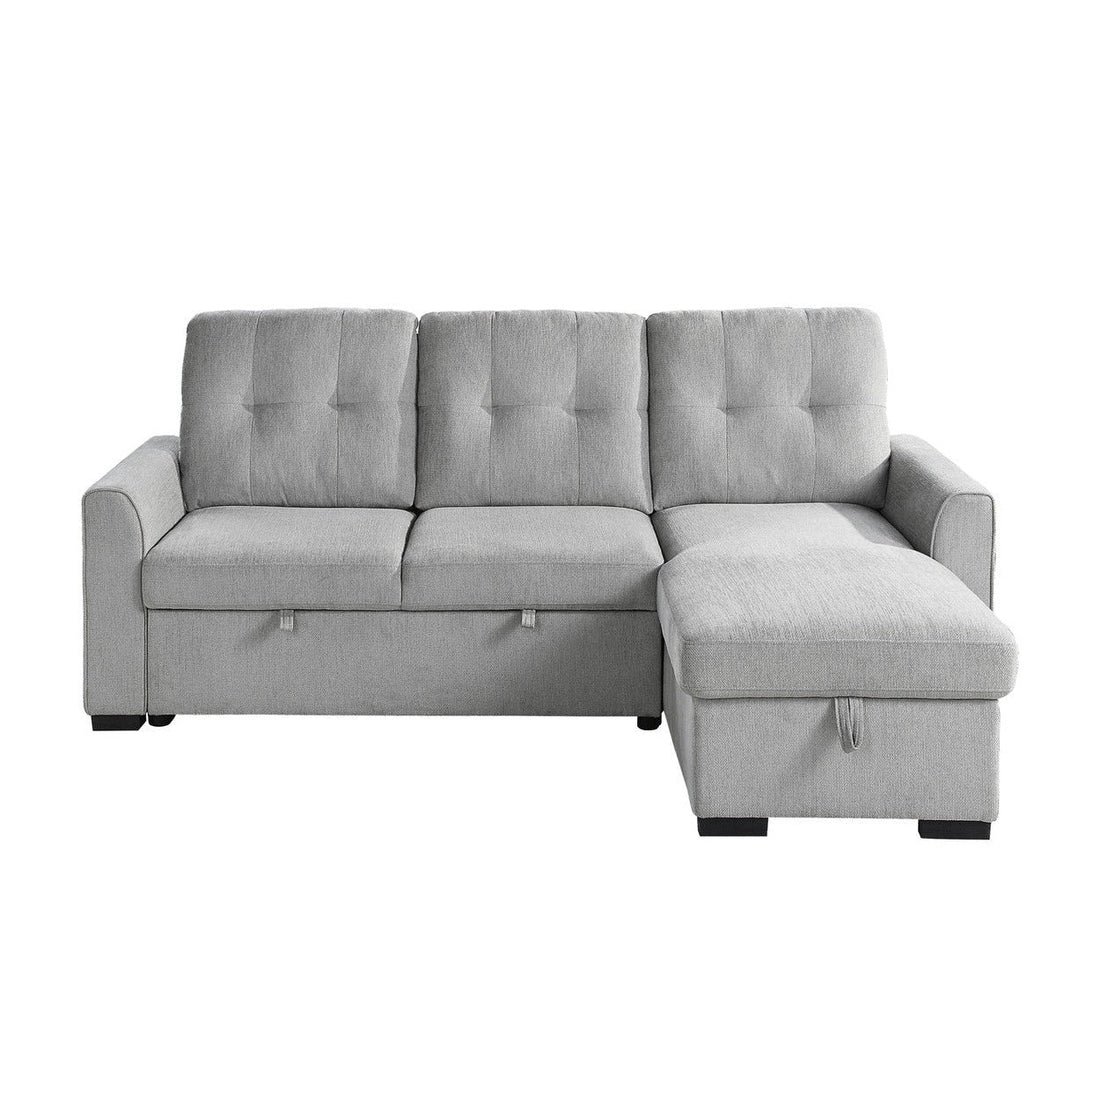 (2)2-Piece Reversible Sectional with Storage 9402GRY*SC